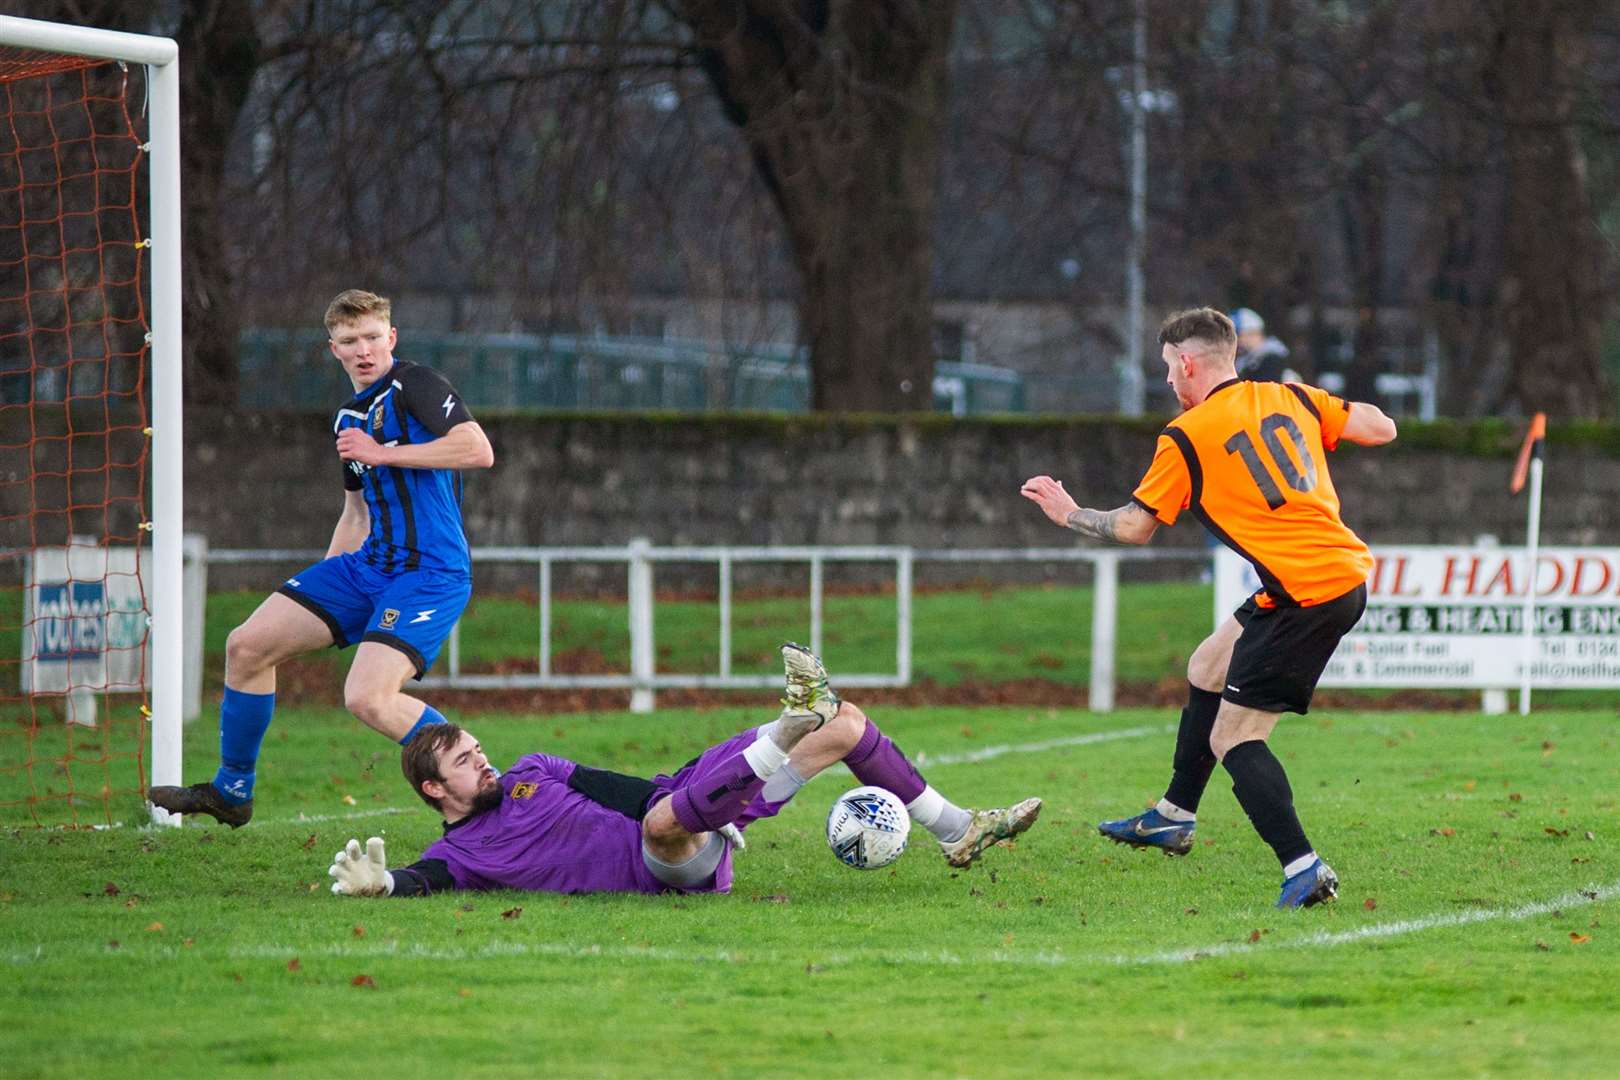 Huntly goalkeeper Euan Storrier pulls off a succession of good saves to deny Alisdair Sutherland a goal for the home side...Rothes FC (1) vs Huntly FC (0) - Highland Football League - Mackessack Park , Rothes 28/11/2020...Picture: Daniel Forsyth..